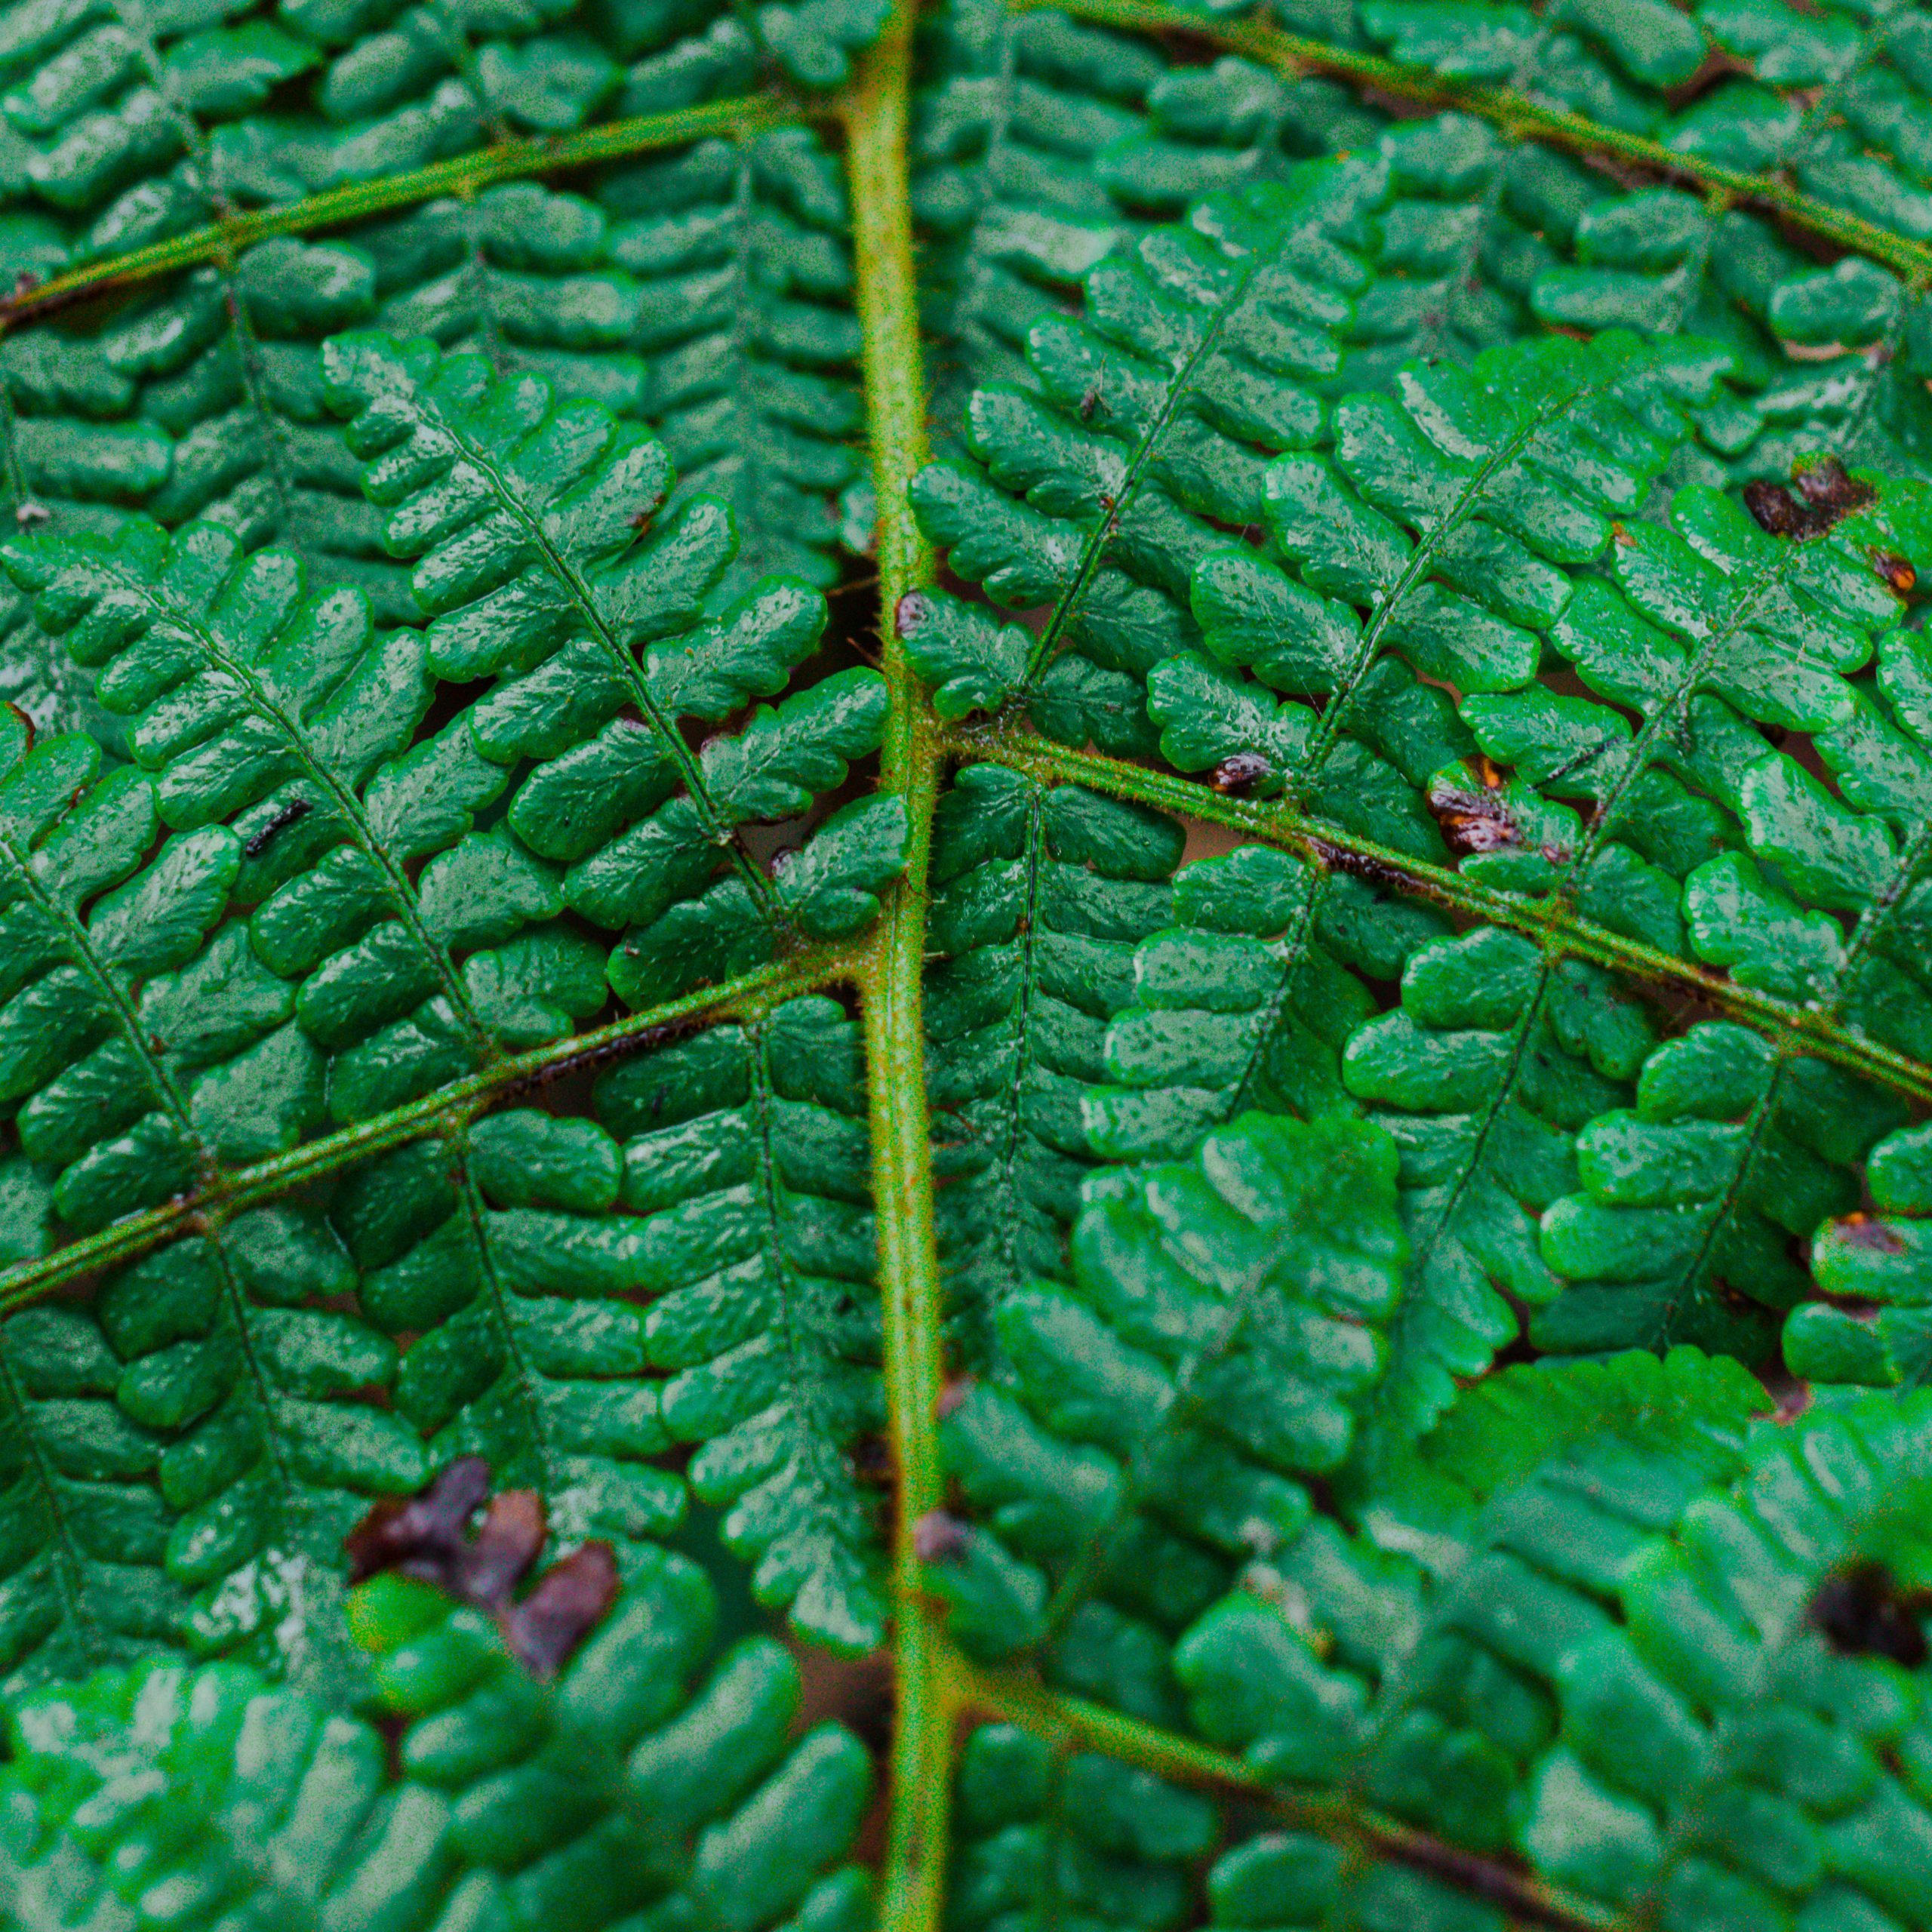 Leaves of plant